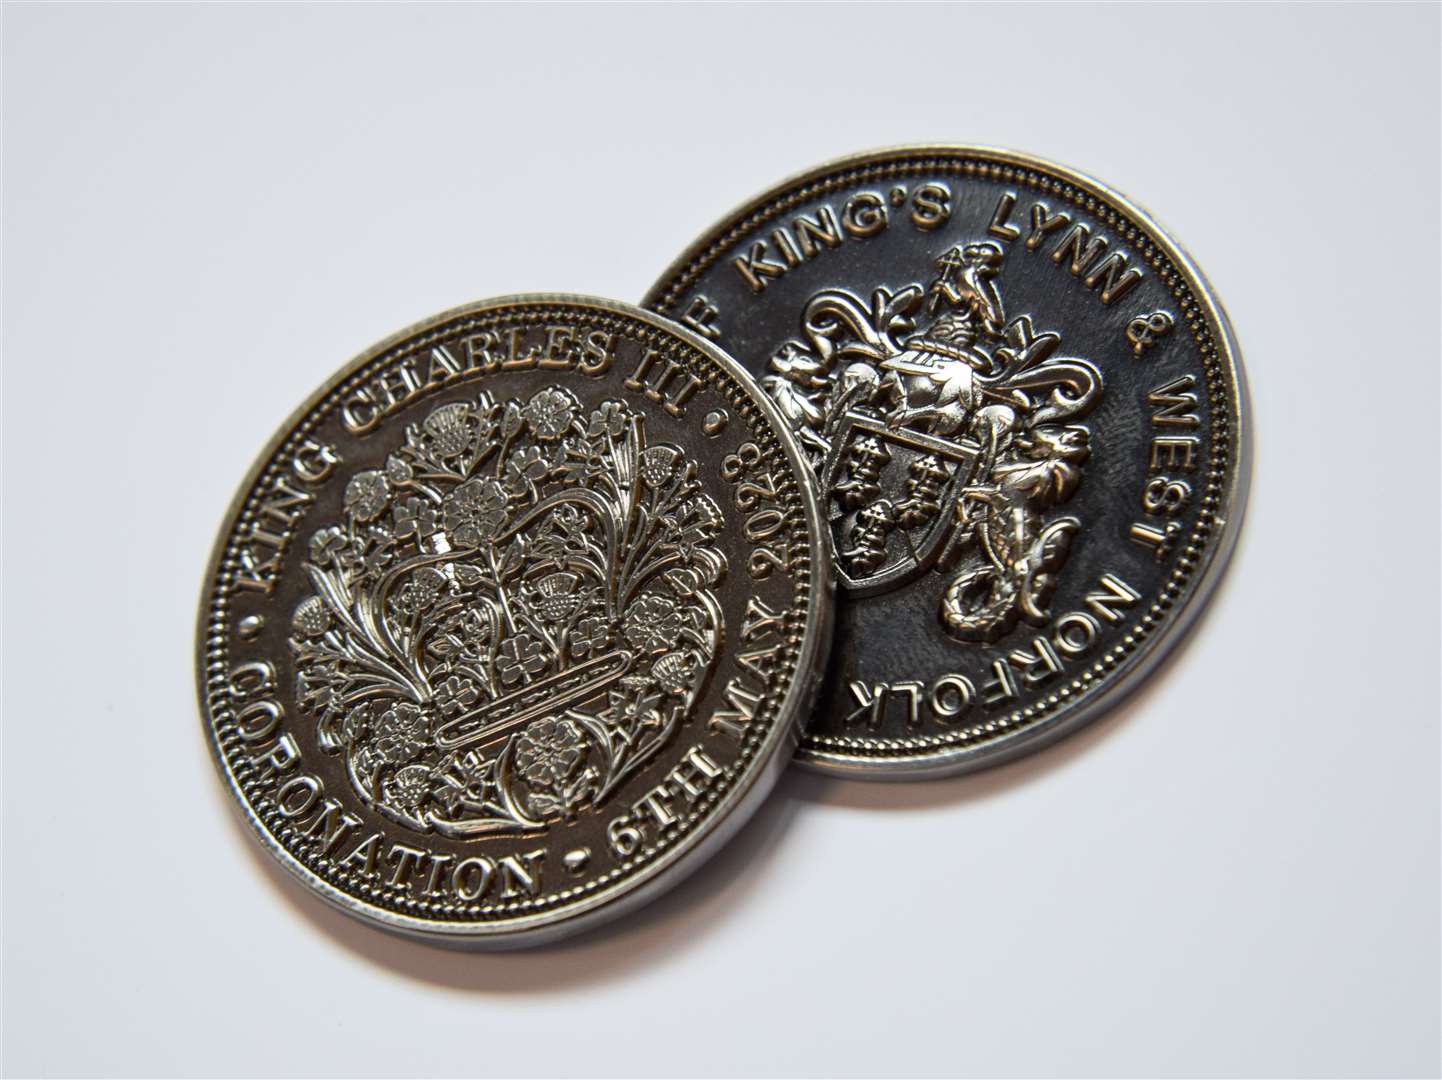 Coronation coins will be given to all primary school children in West Norfolk